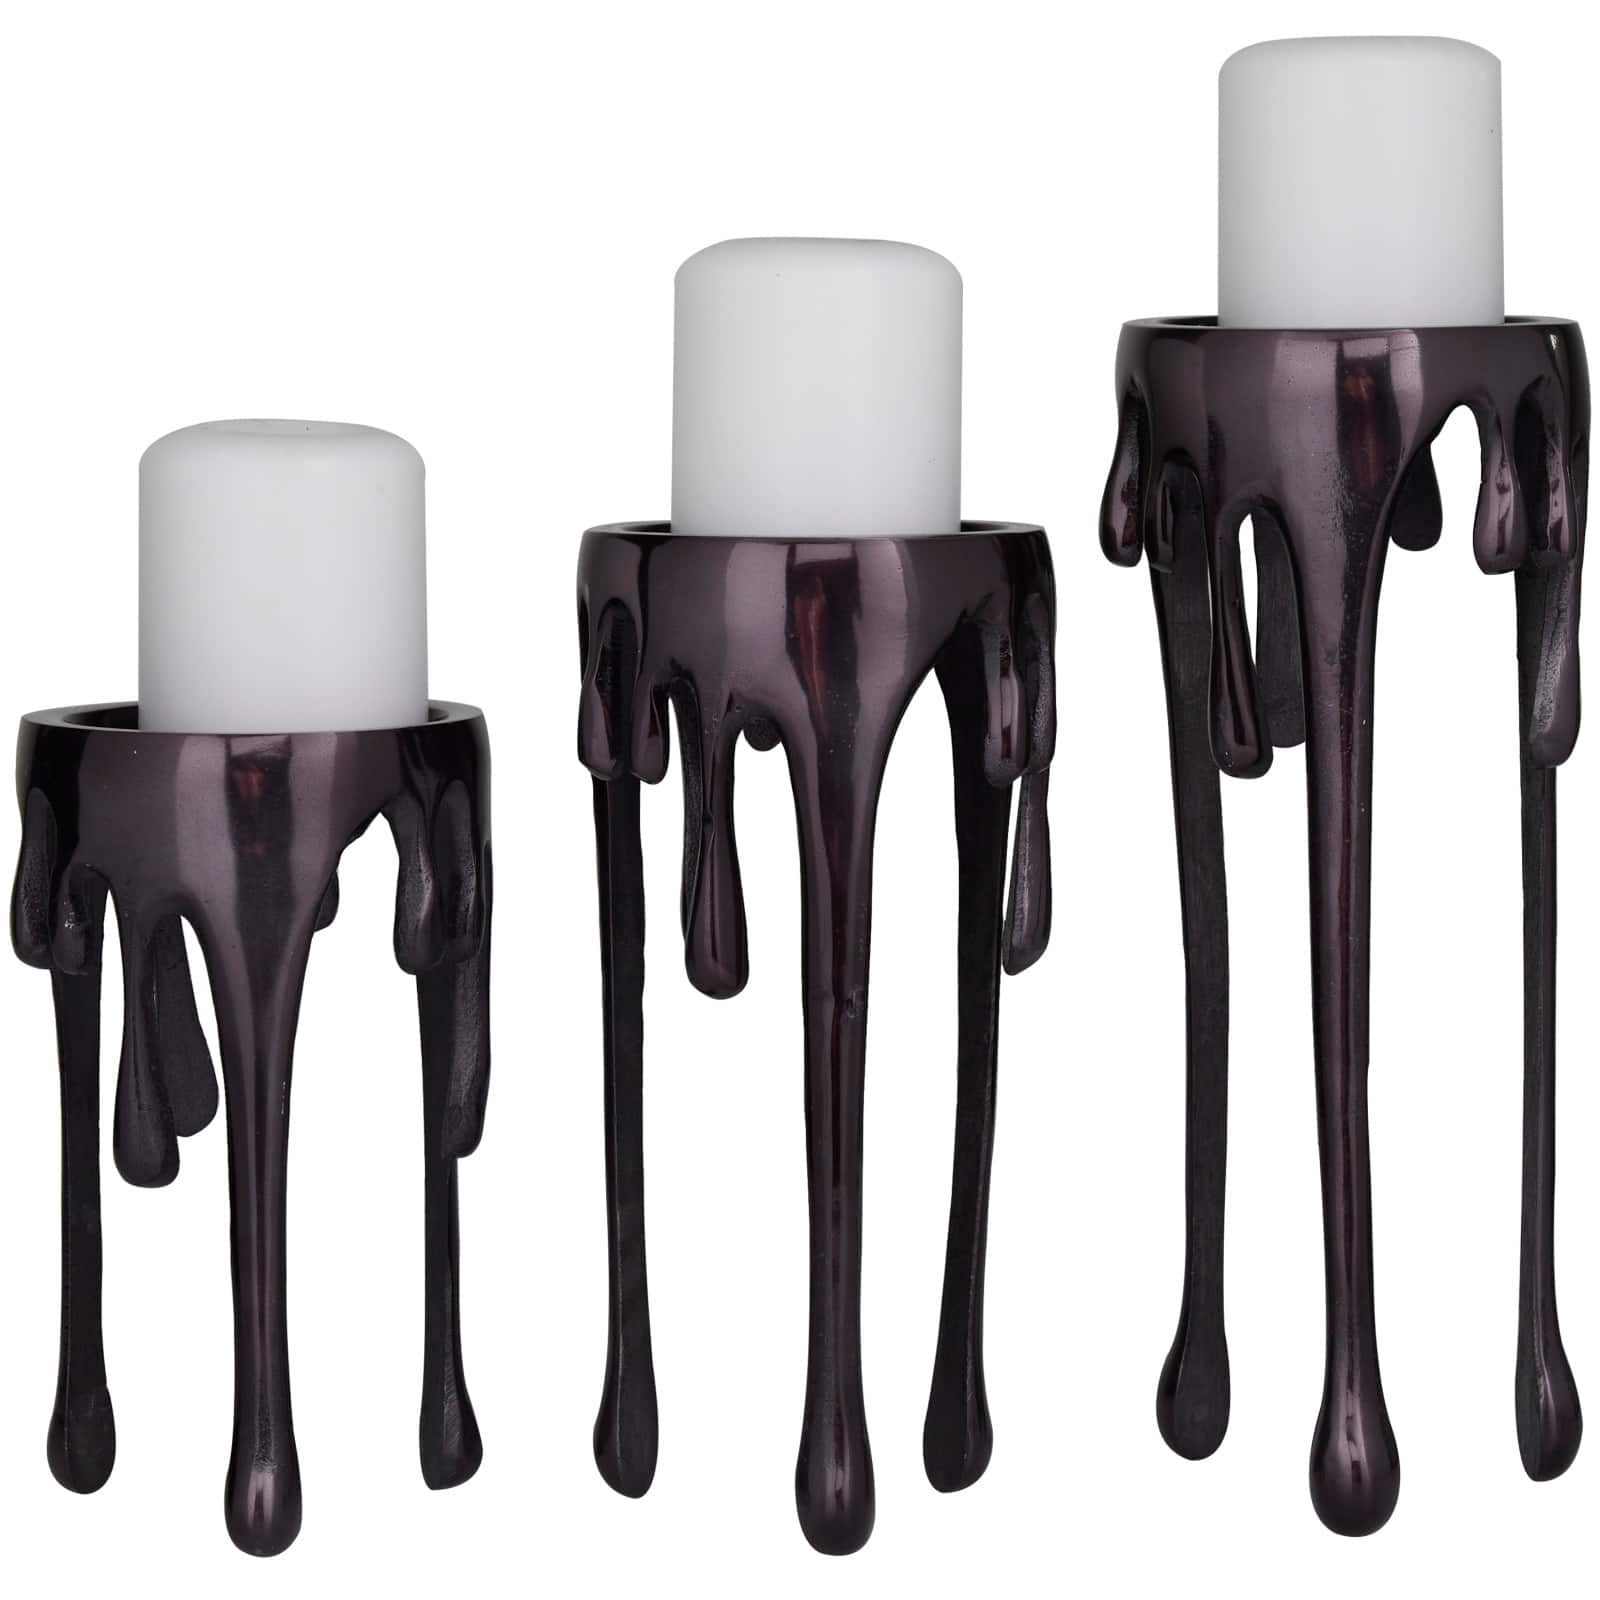 CosmoLiving by Cosmopolitan Black Aluminum Pillar Candle Holder with Dripping Melting Designed Legs Set